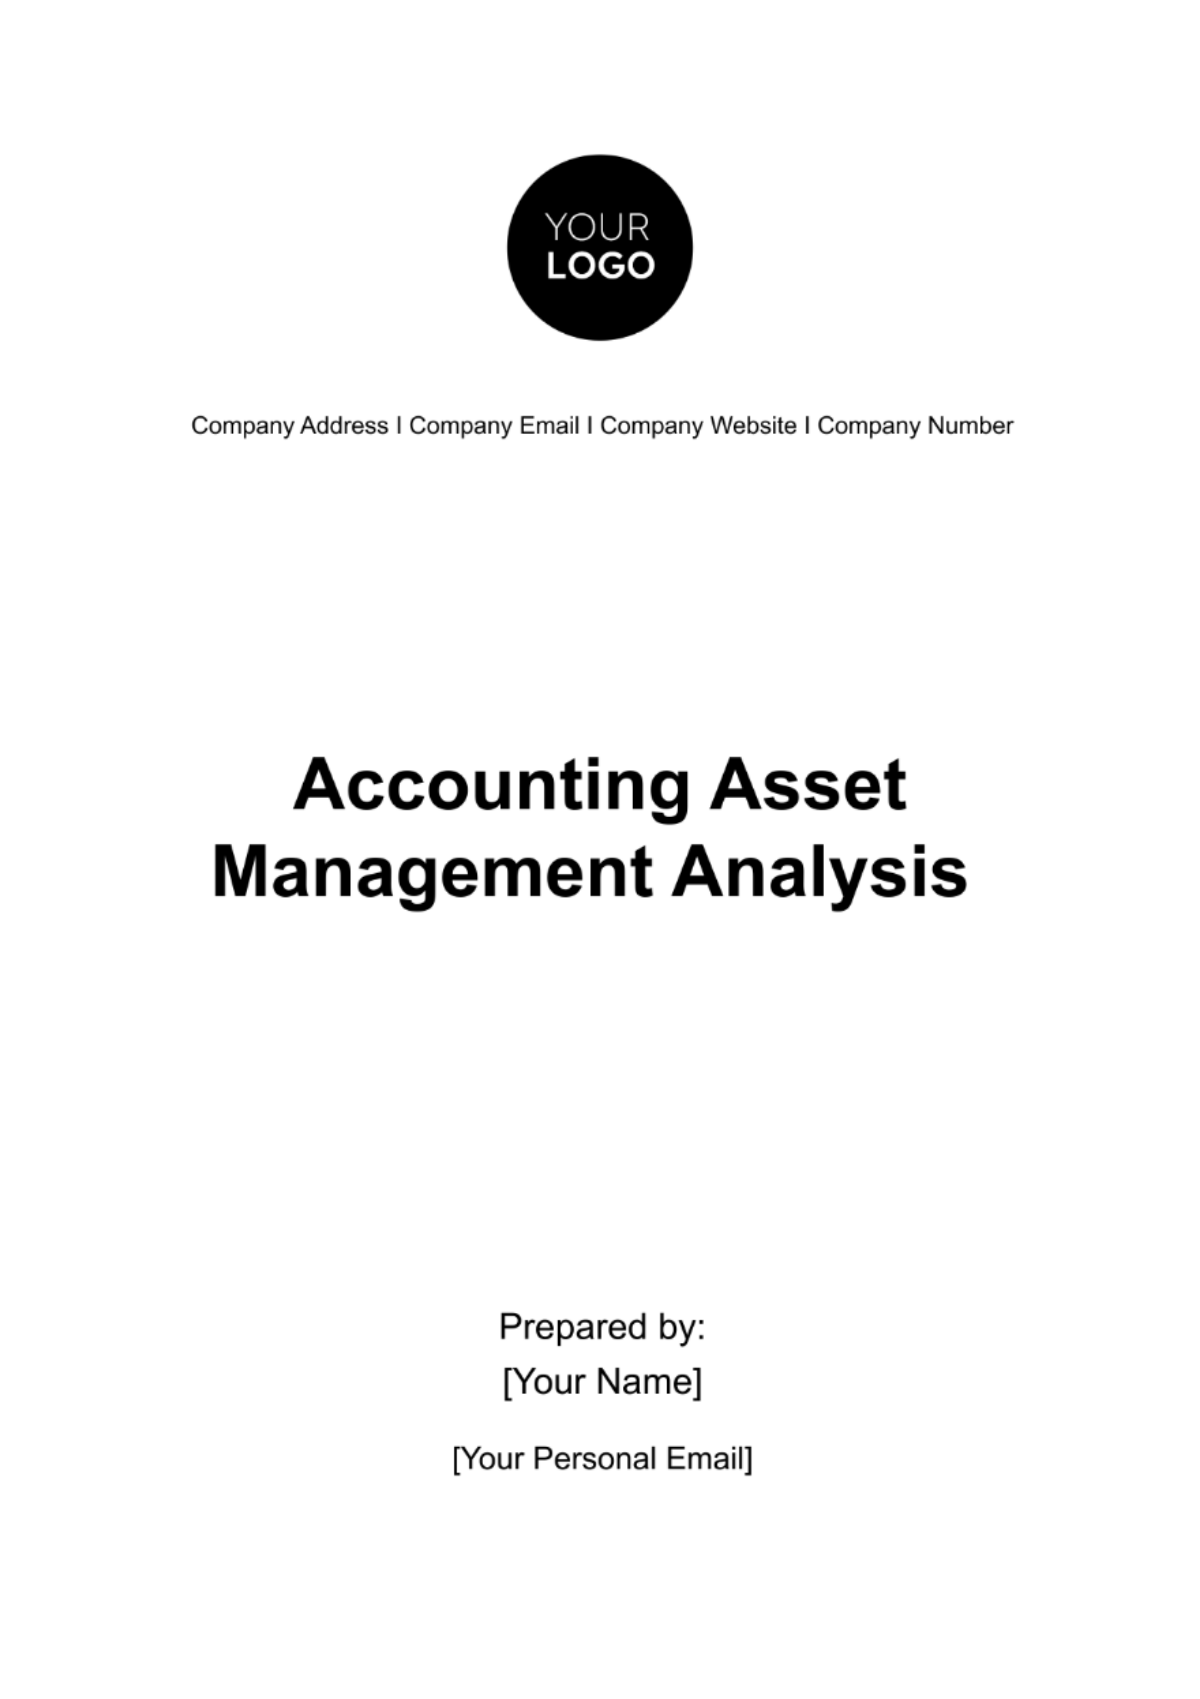 Accounting Asset Management Analysis Template